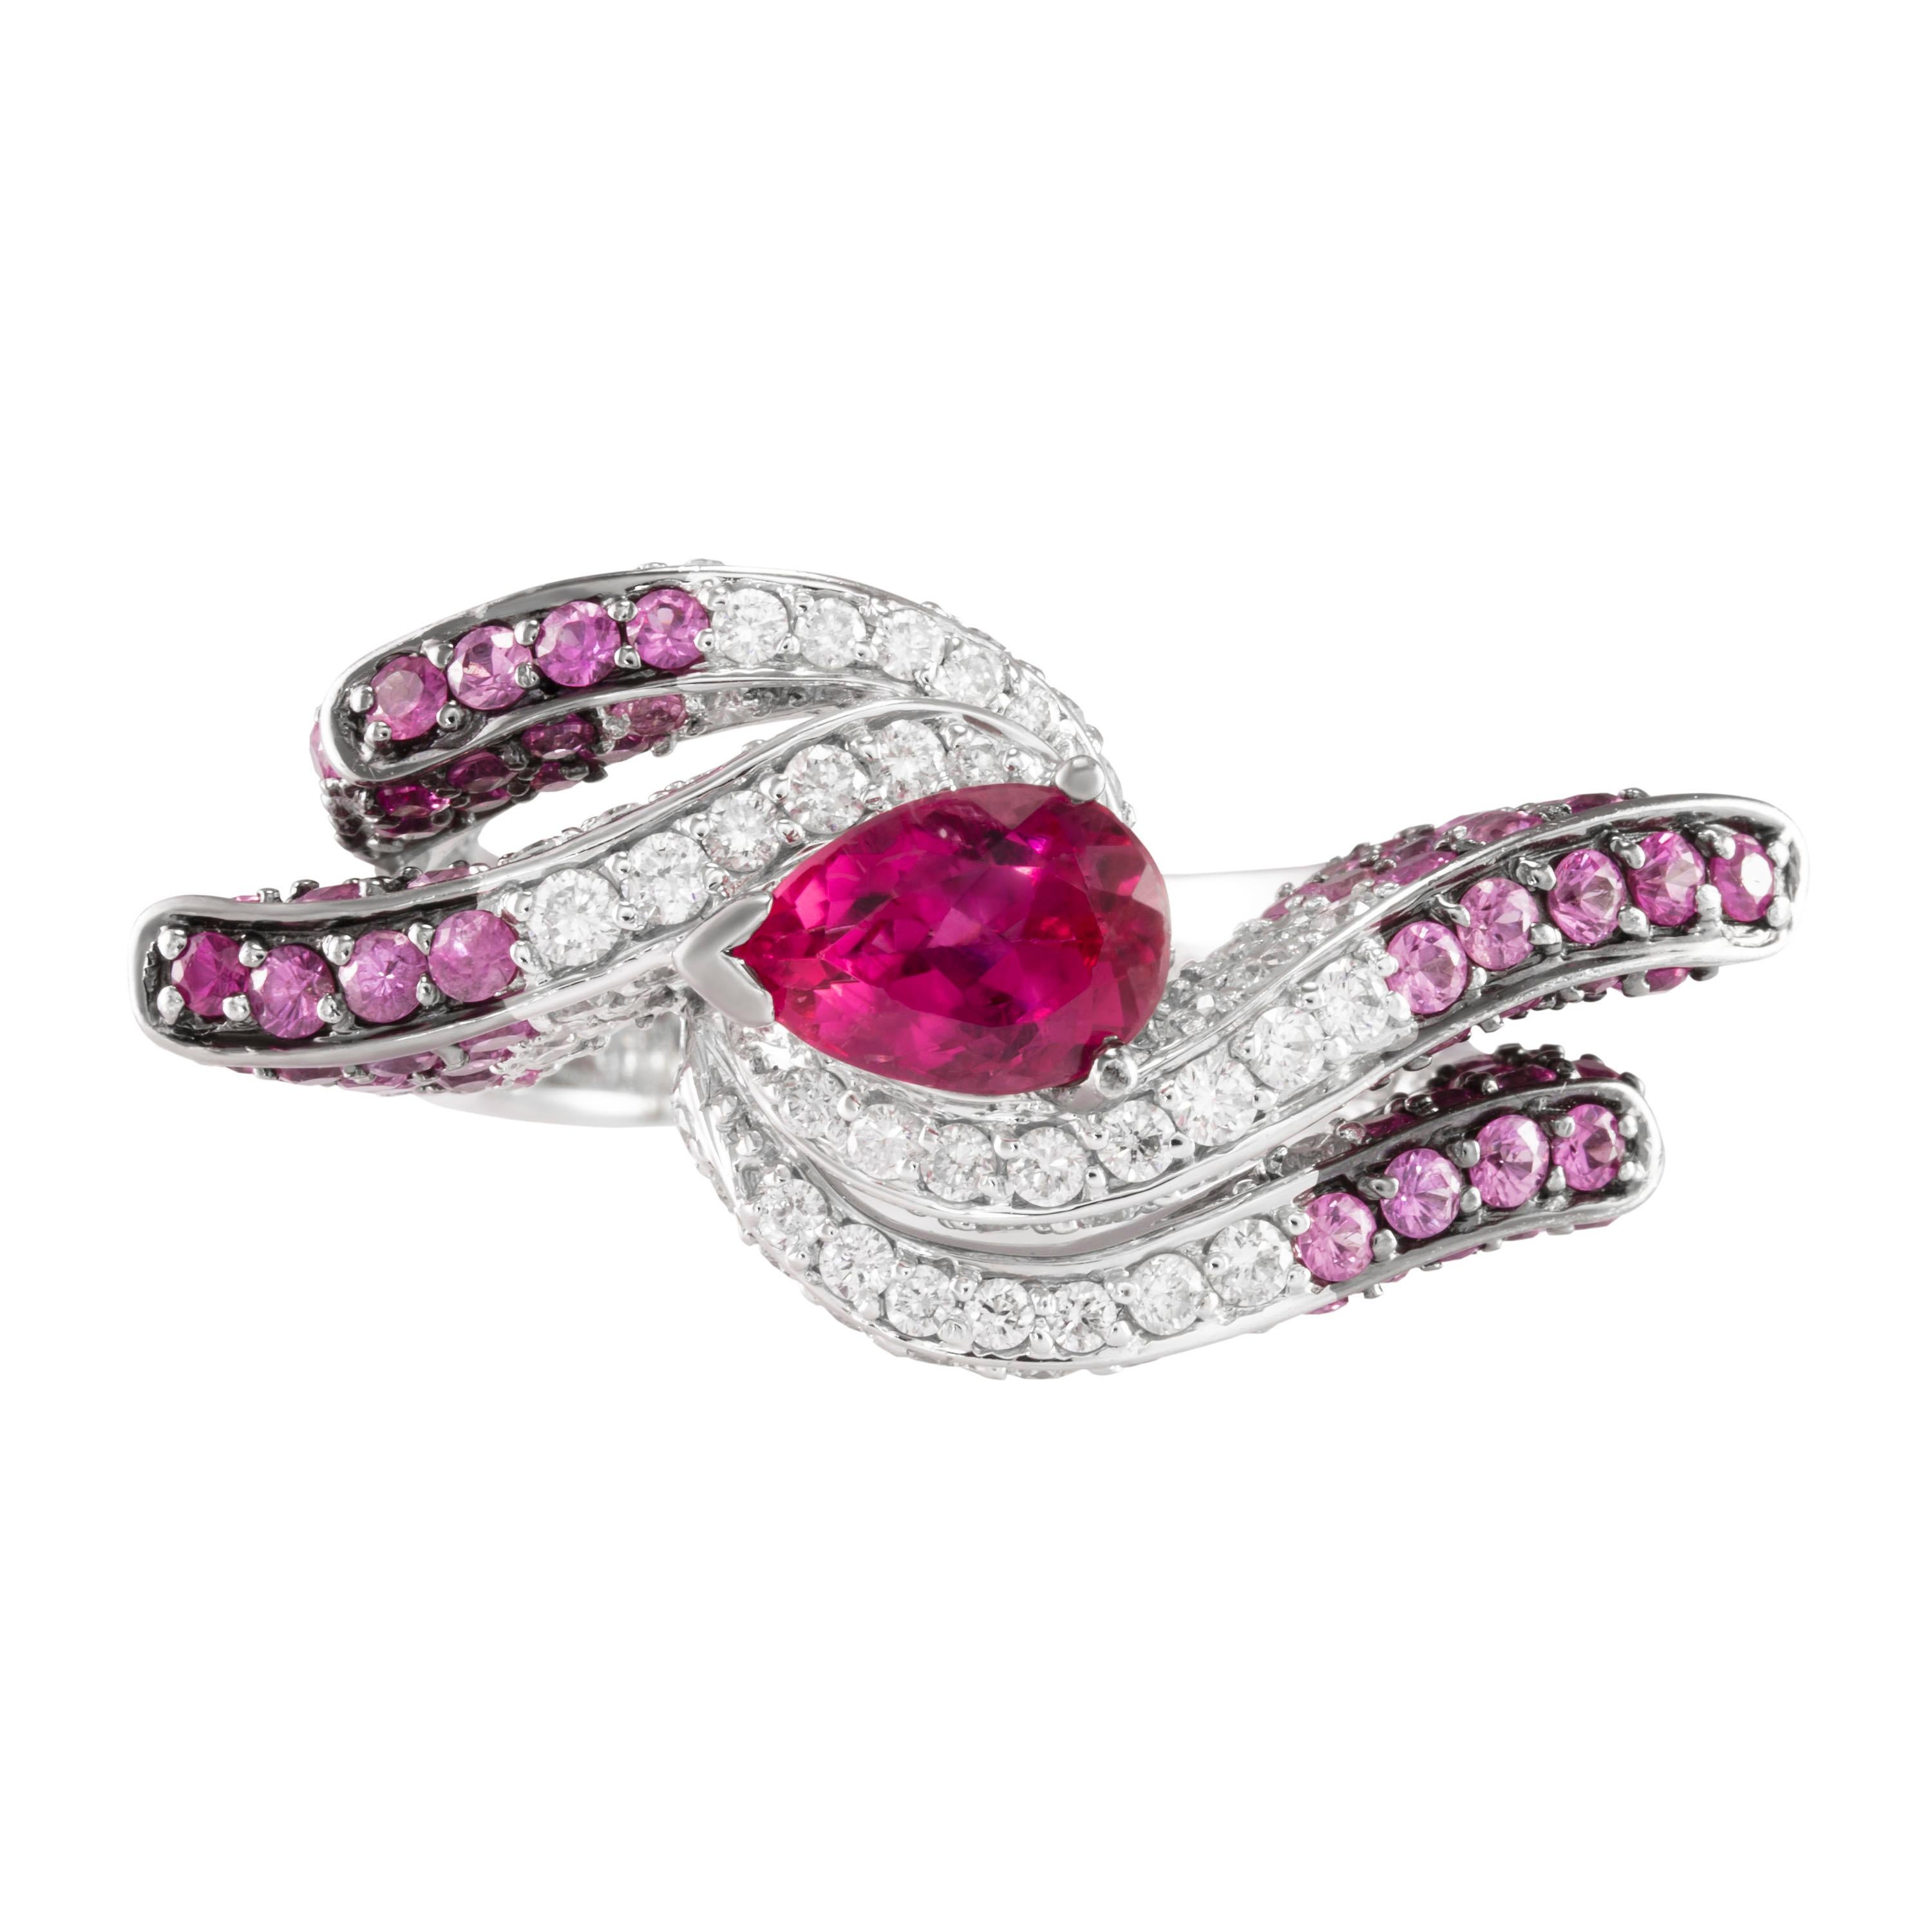 Butani's 18-karat white gold cocktail ring is encrusted with 1.15 carats of shimmering white diamonds, 2.69 carats of pink sapphires, 0.23 carats of rubies and centered with a sideways-set 1.57 carat pear-shape rubelite.  These precious jewels have